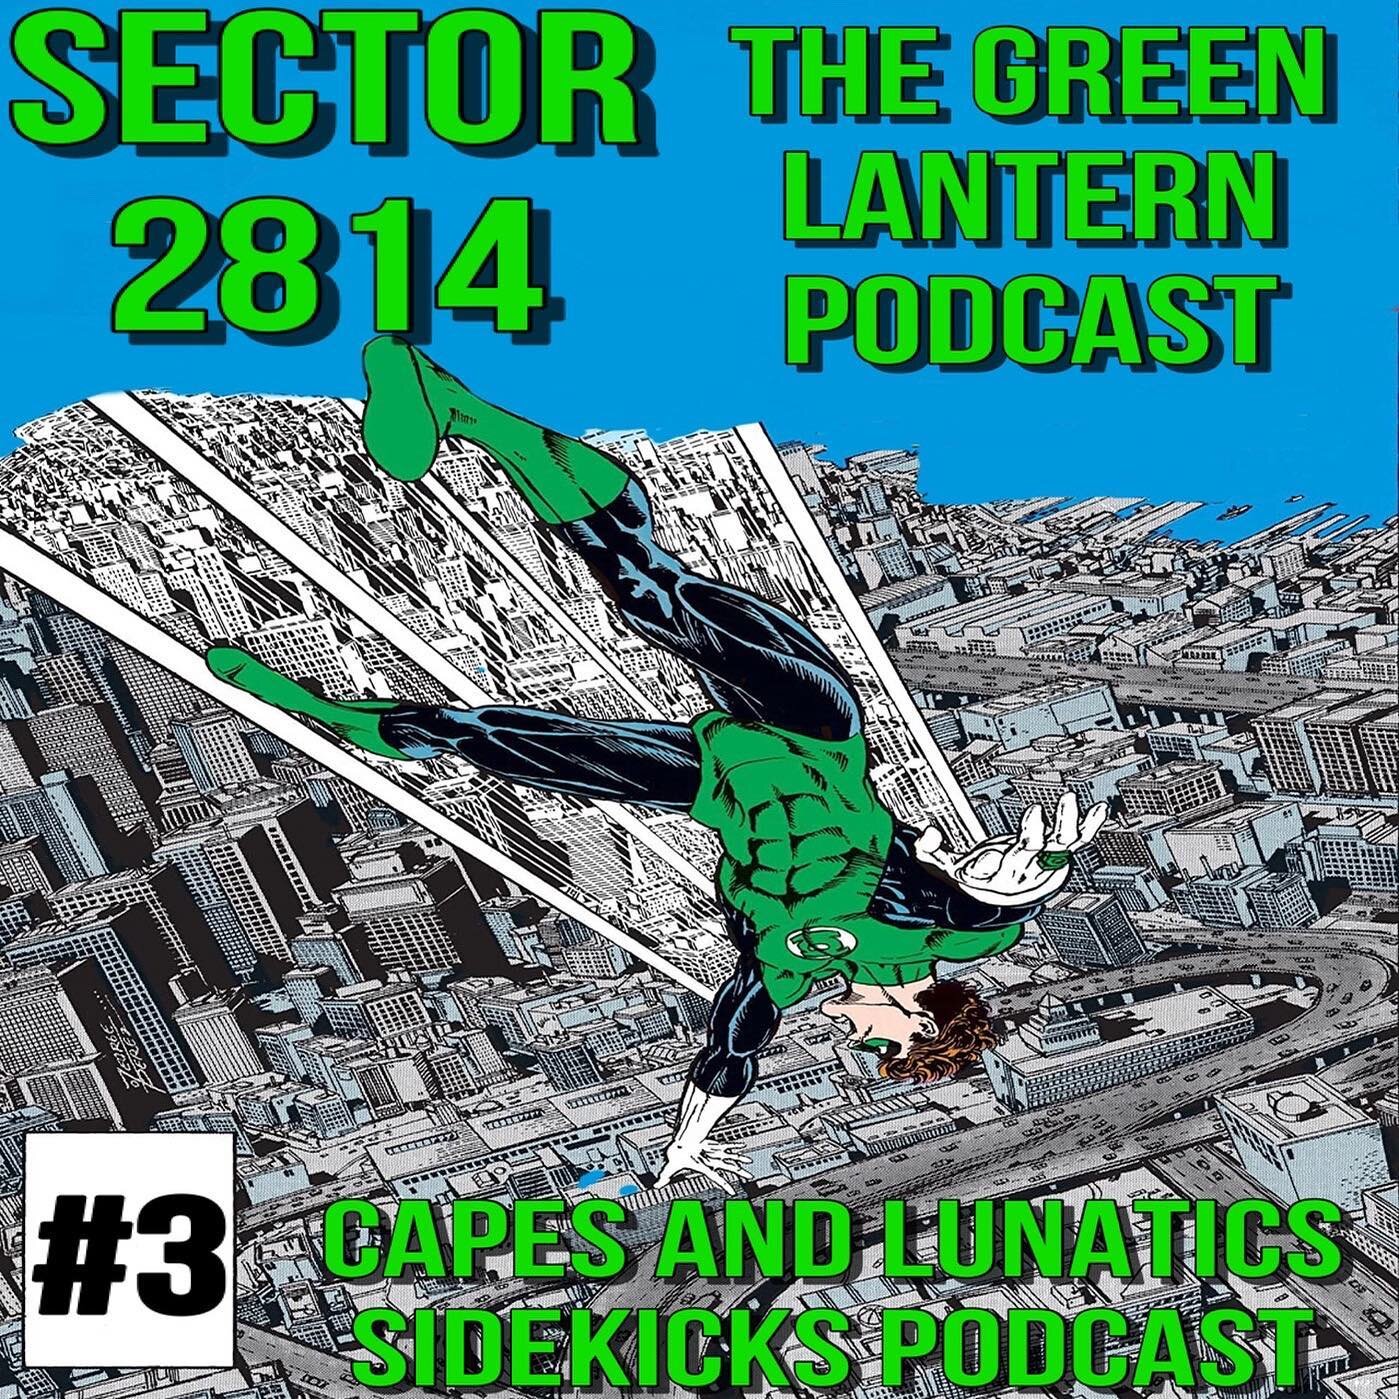 Sector 2814 #podcast episode #3! @nightwingpdp, @mattkona, and @wallred review the #greenlantern stories from #actioncomicsweekly !Check it out on our #youtubechannel or anywhere you download podcasts (link in bio)! #itunes #stitcher #libsyn #dccomic